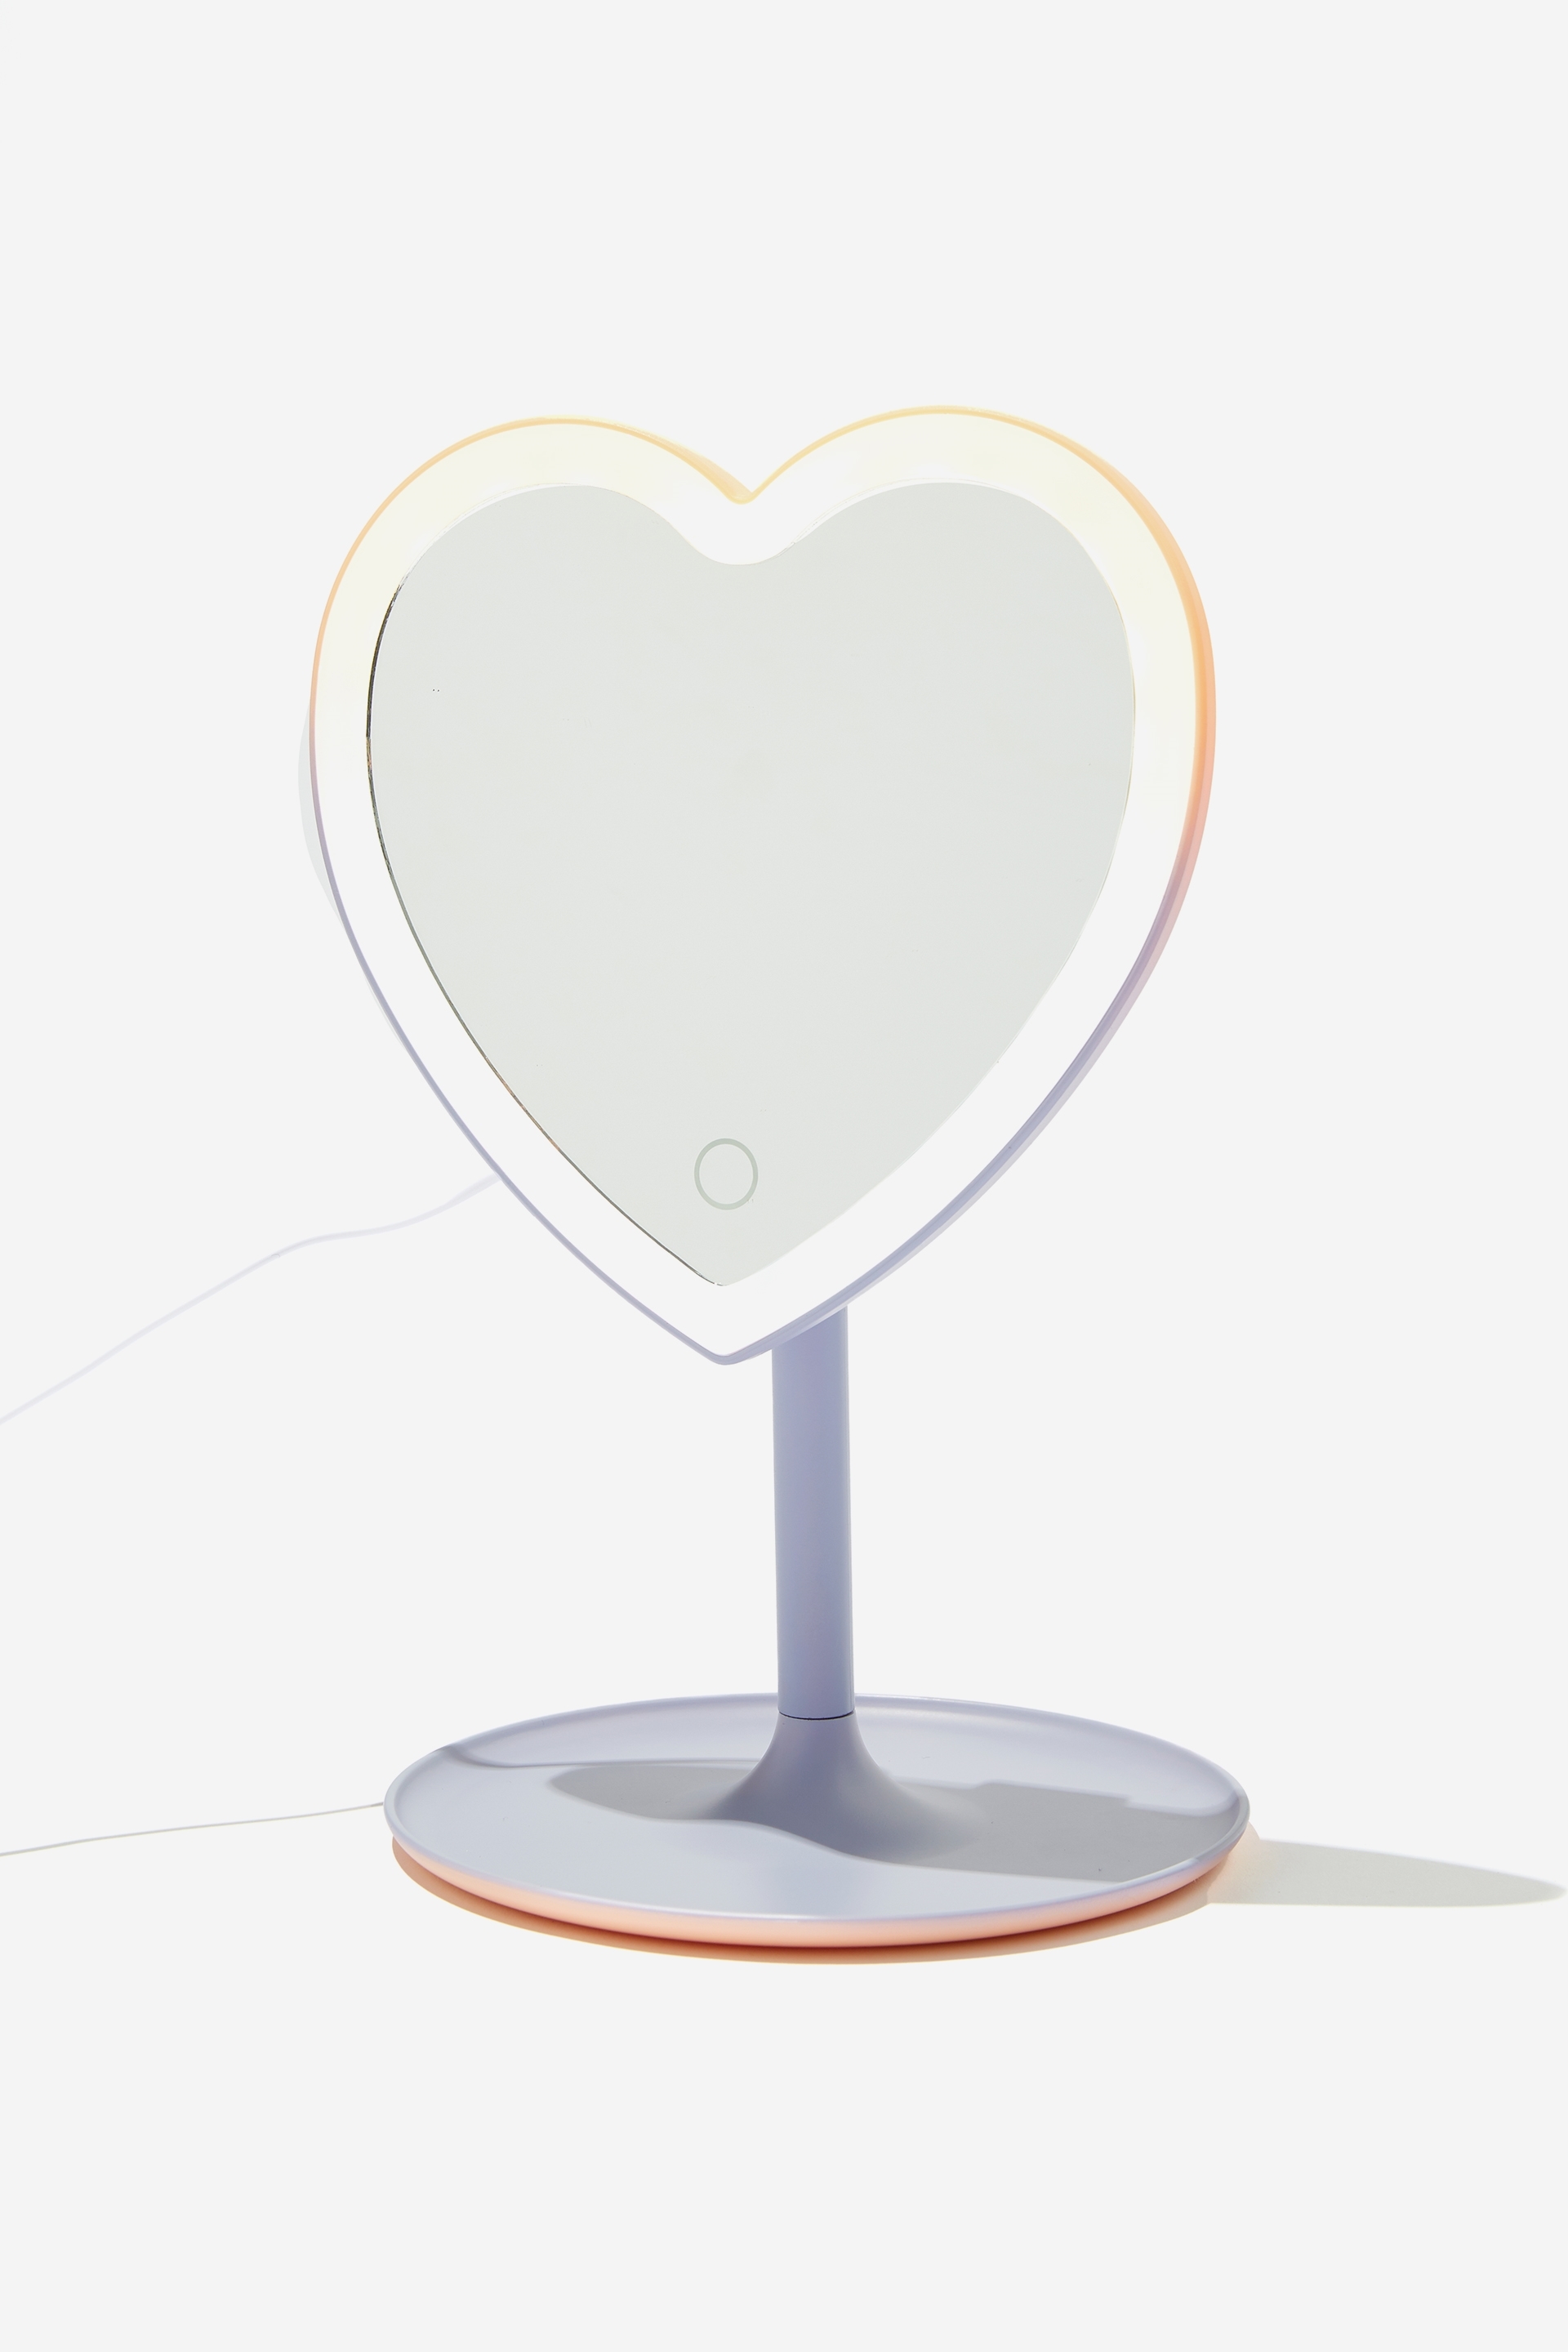 Typo - Shaped Mirror Desk Lamp - Lilac & tropical peach ombre heart